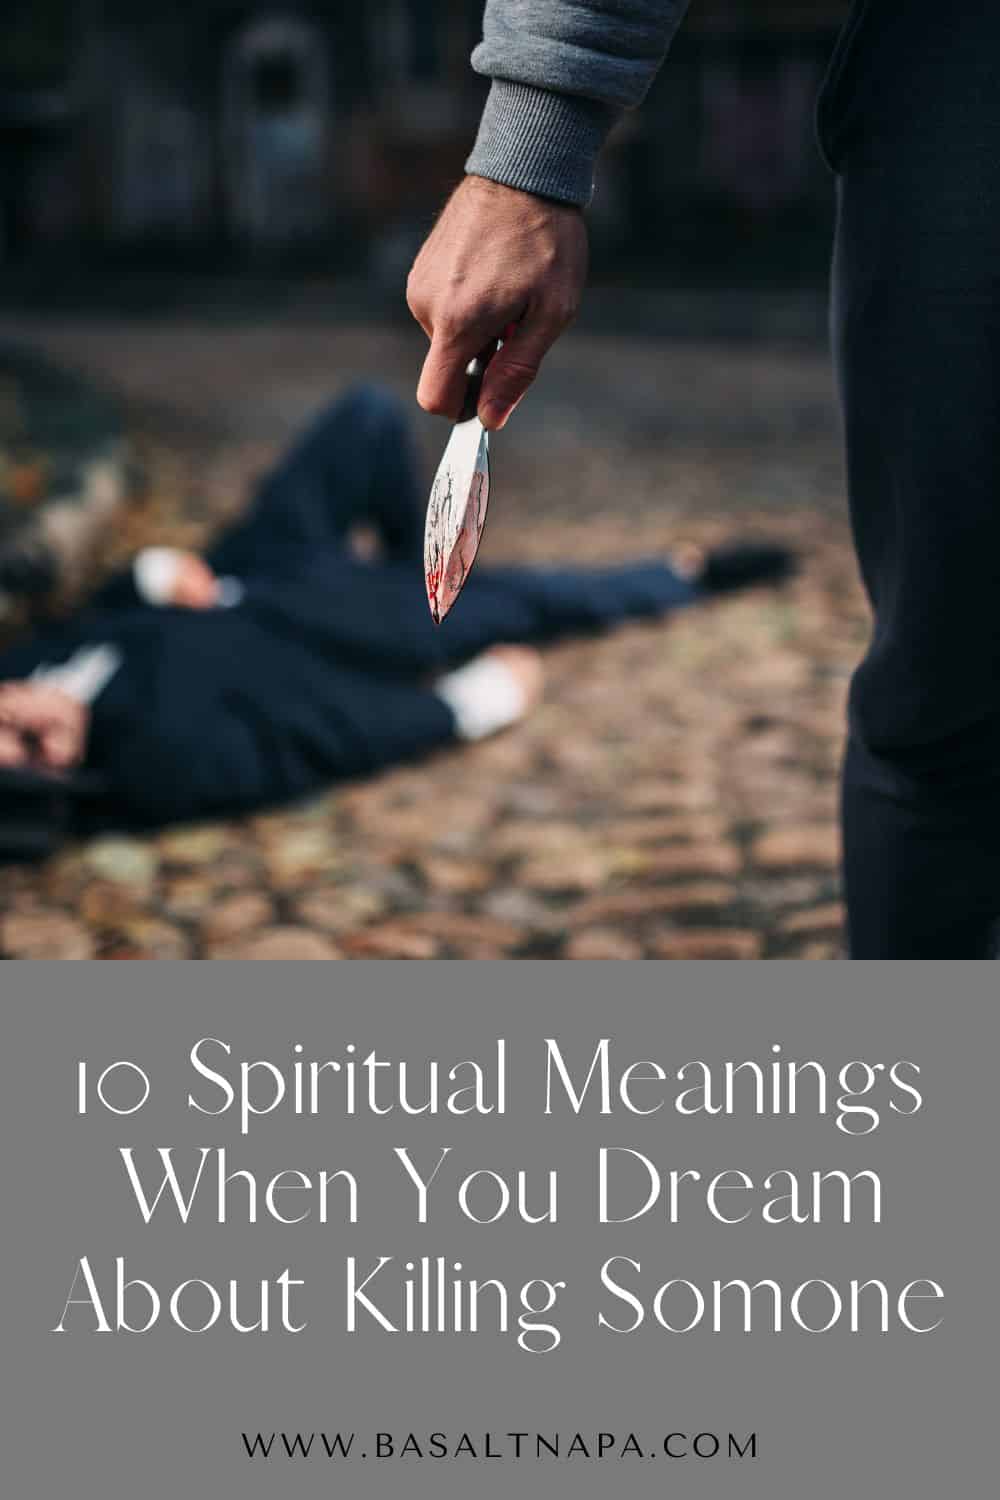 10 Spiritual Meanings When You Dream About Killing Somone